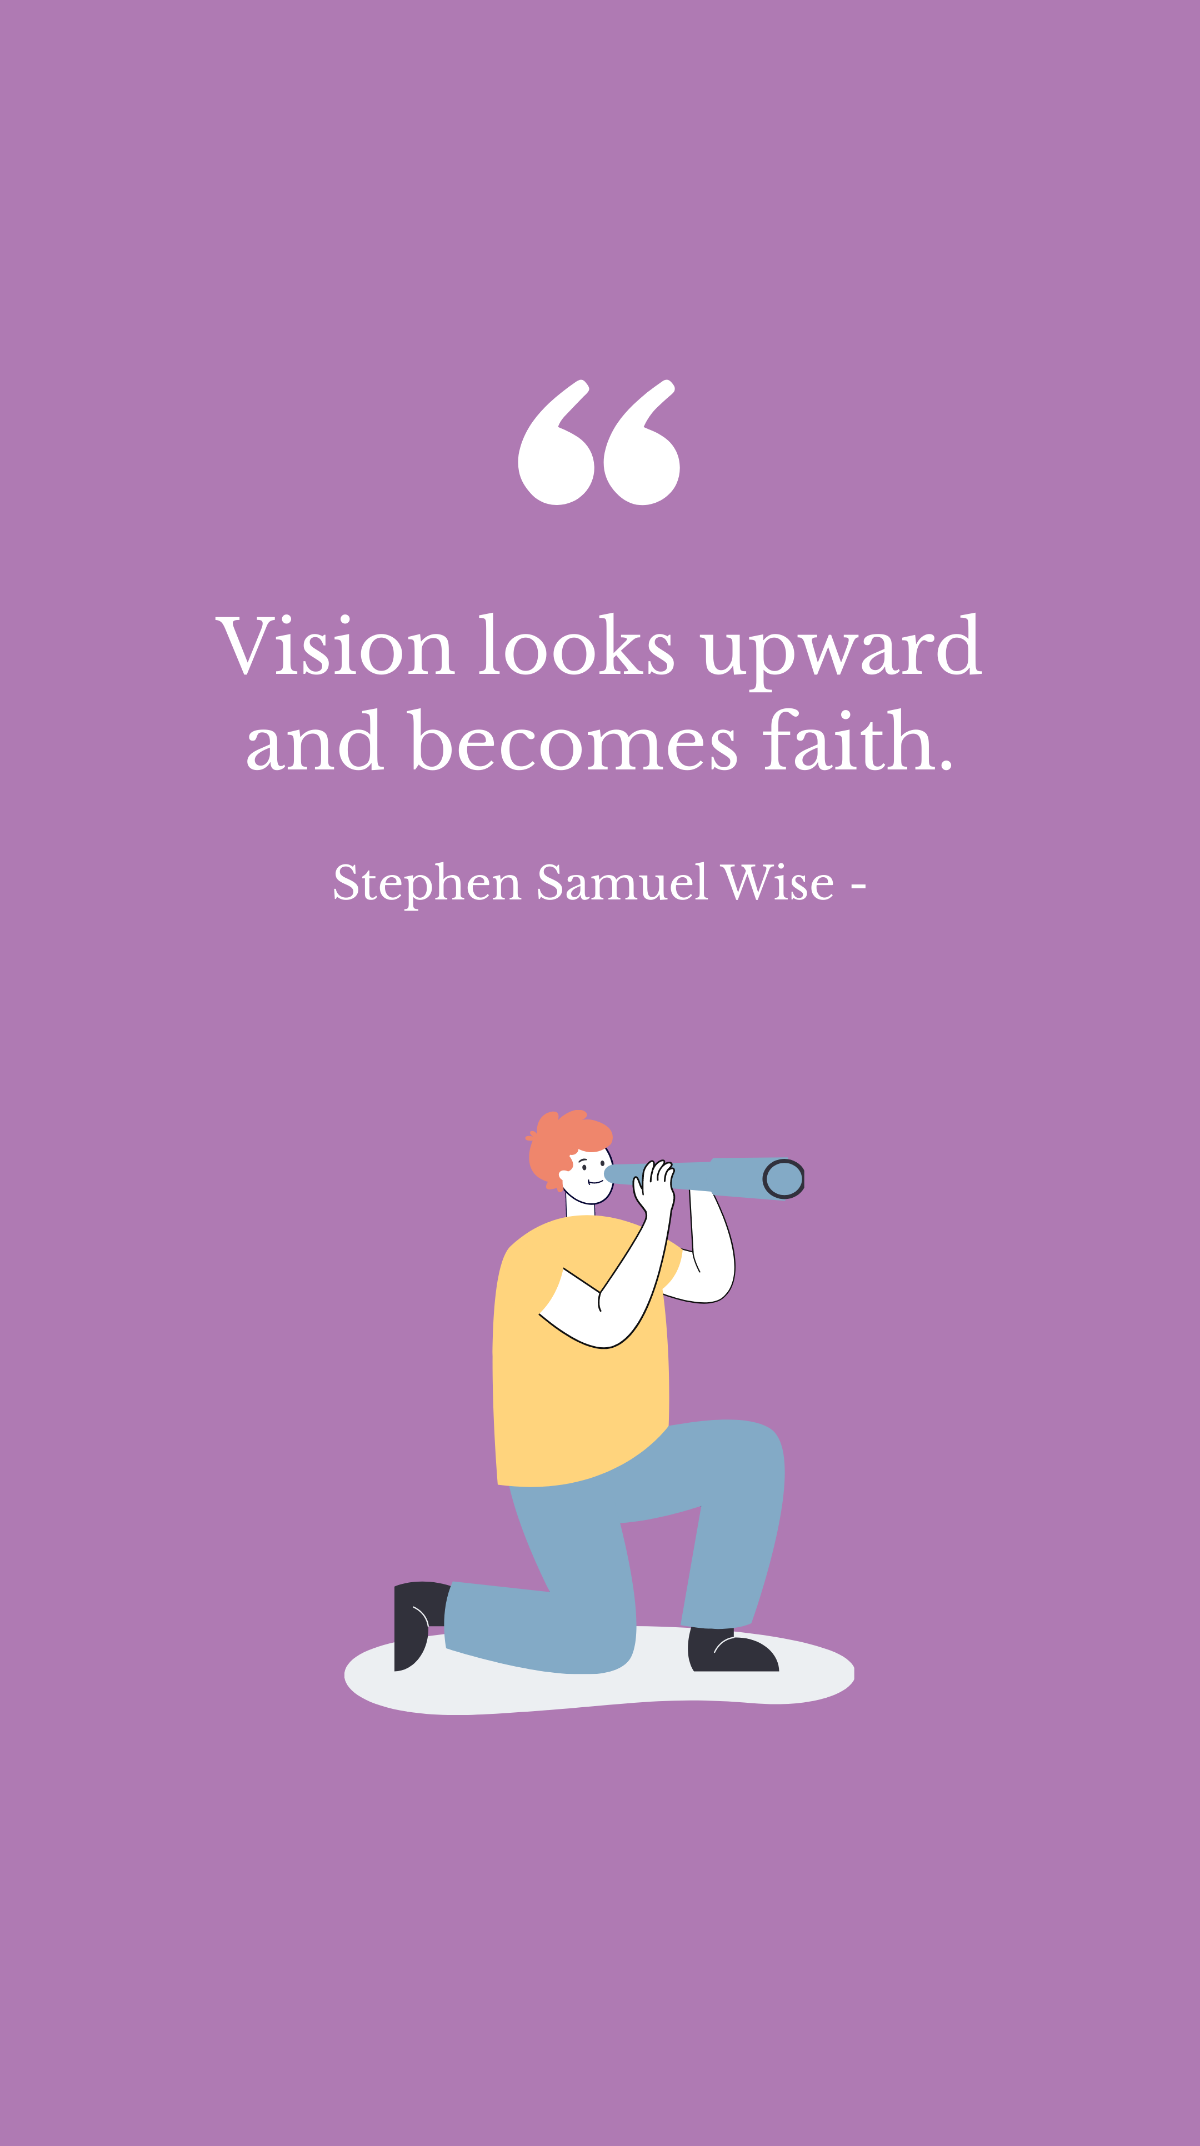 Stephen Samuel Wise - Vision looks upward and becomes faith.